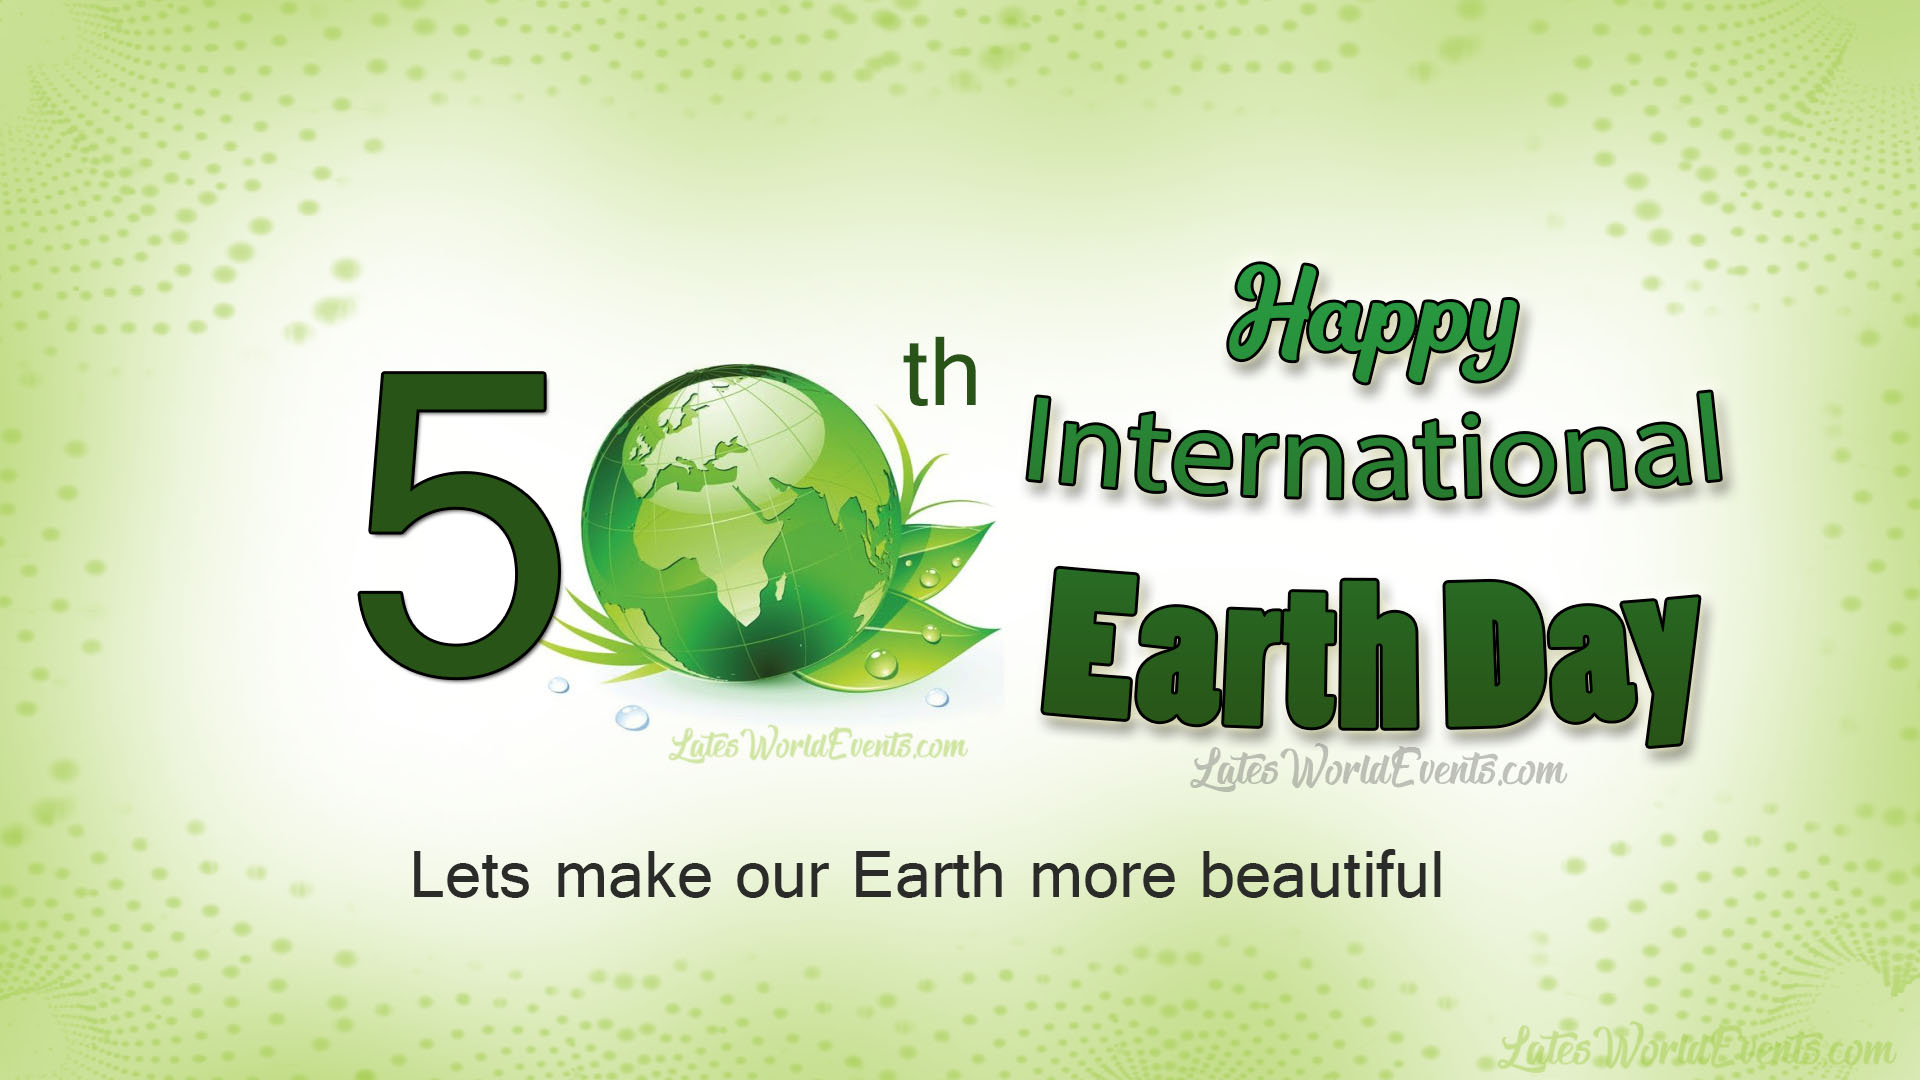 Download-earth-day-poster-2020